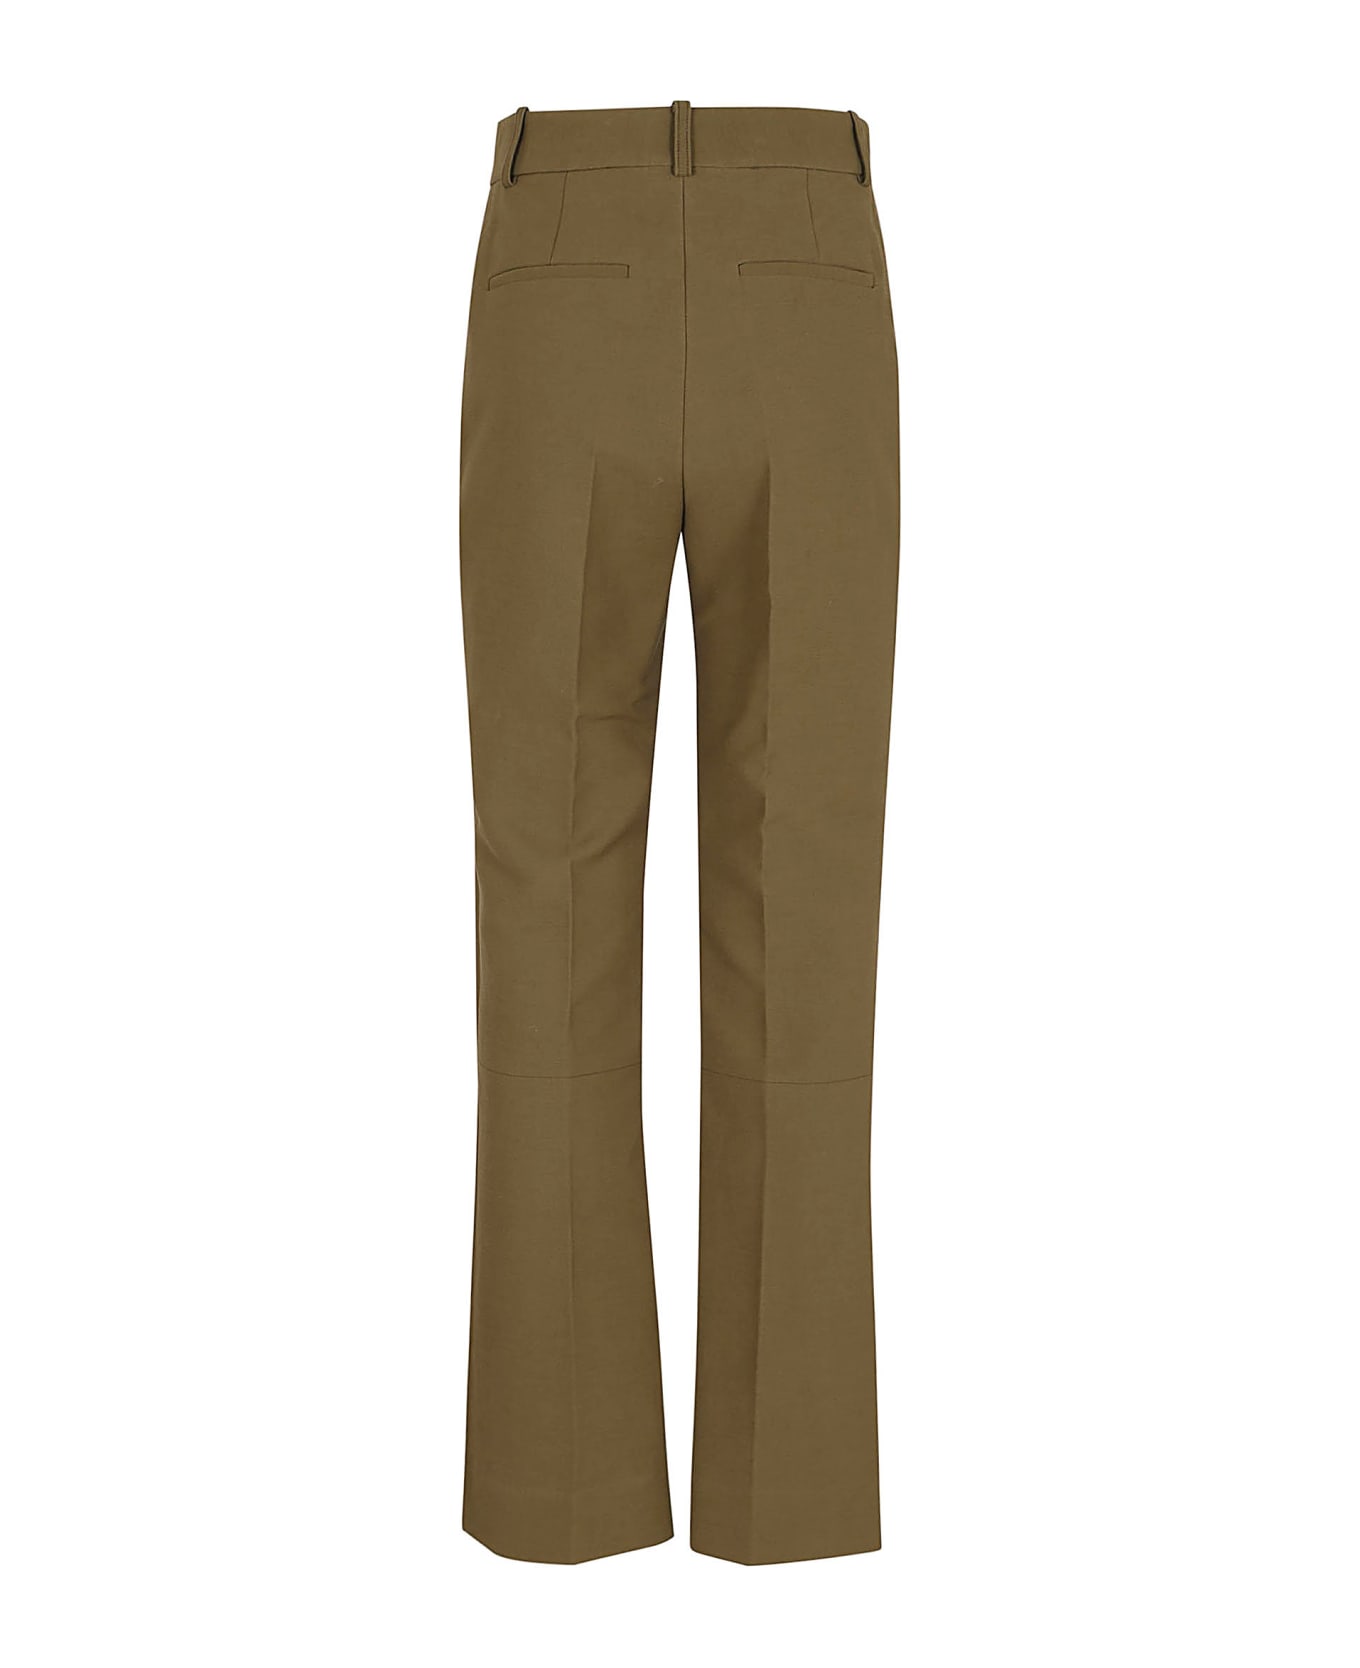 Victoria Beckham Cropped Kick Trousers - Seaweed